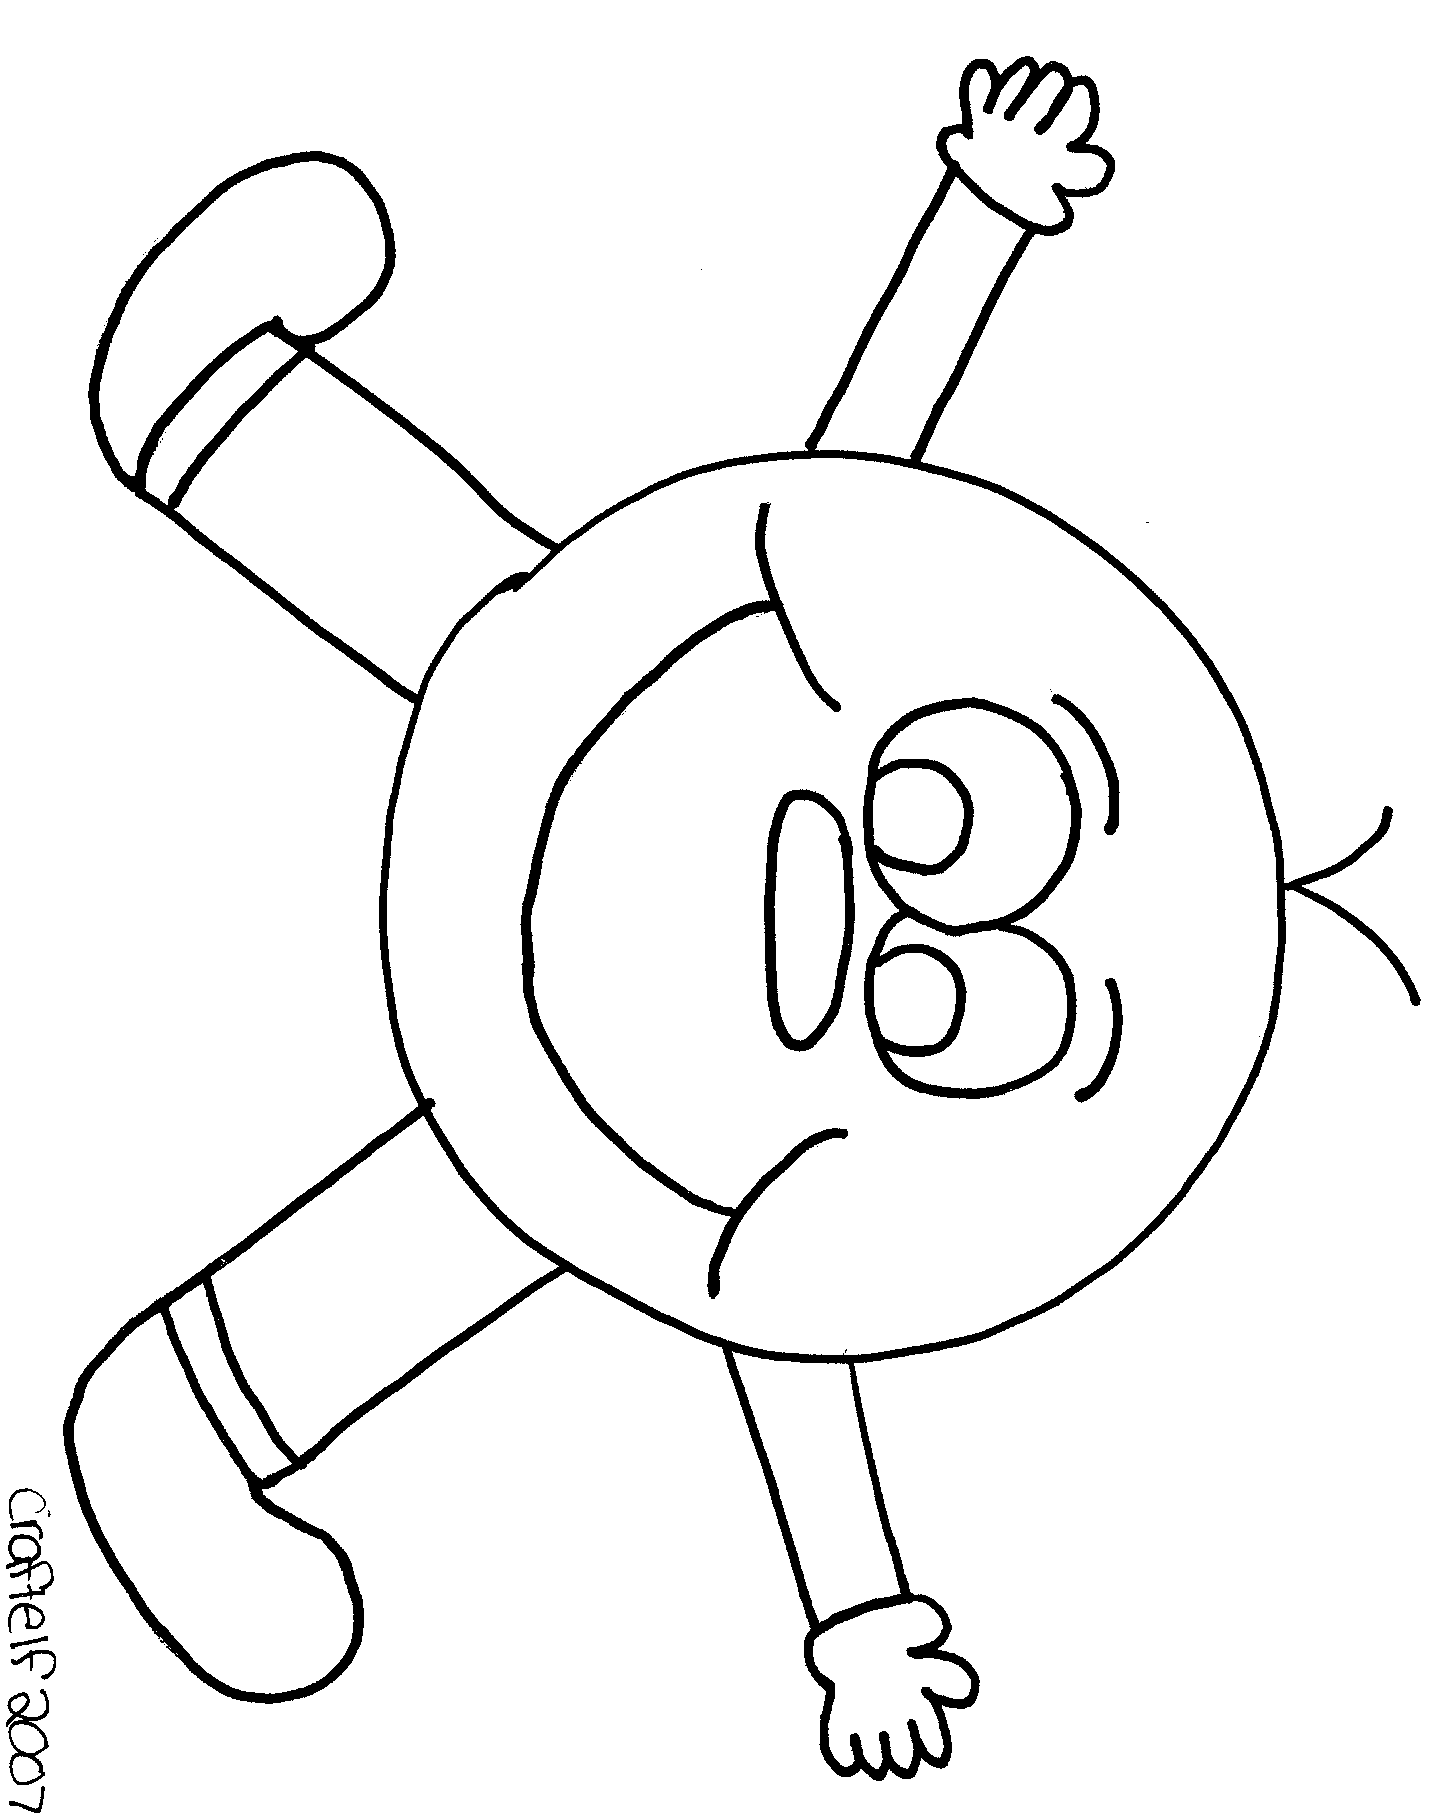 Free coloring page - smiley guy - fun easy kids activity